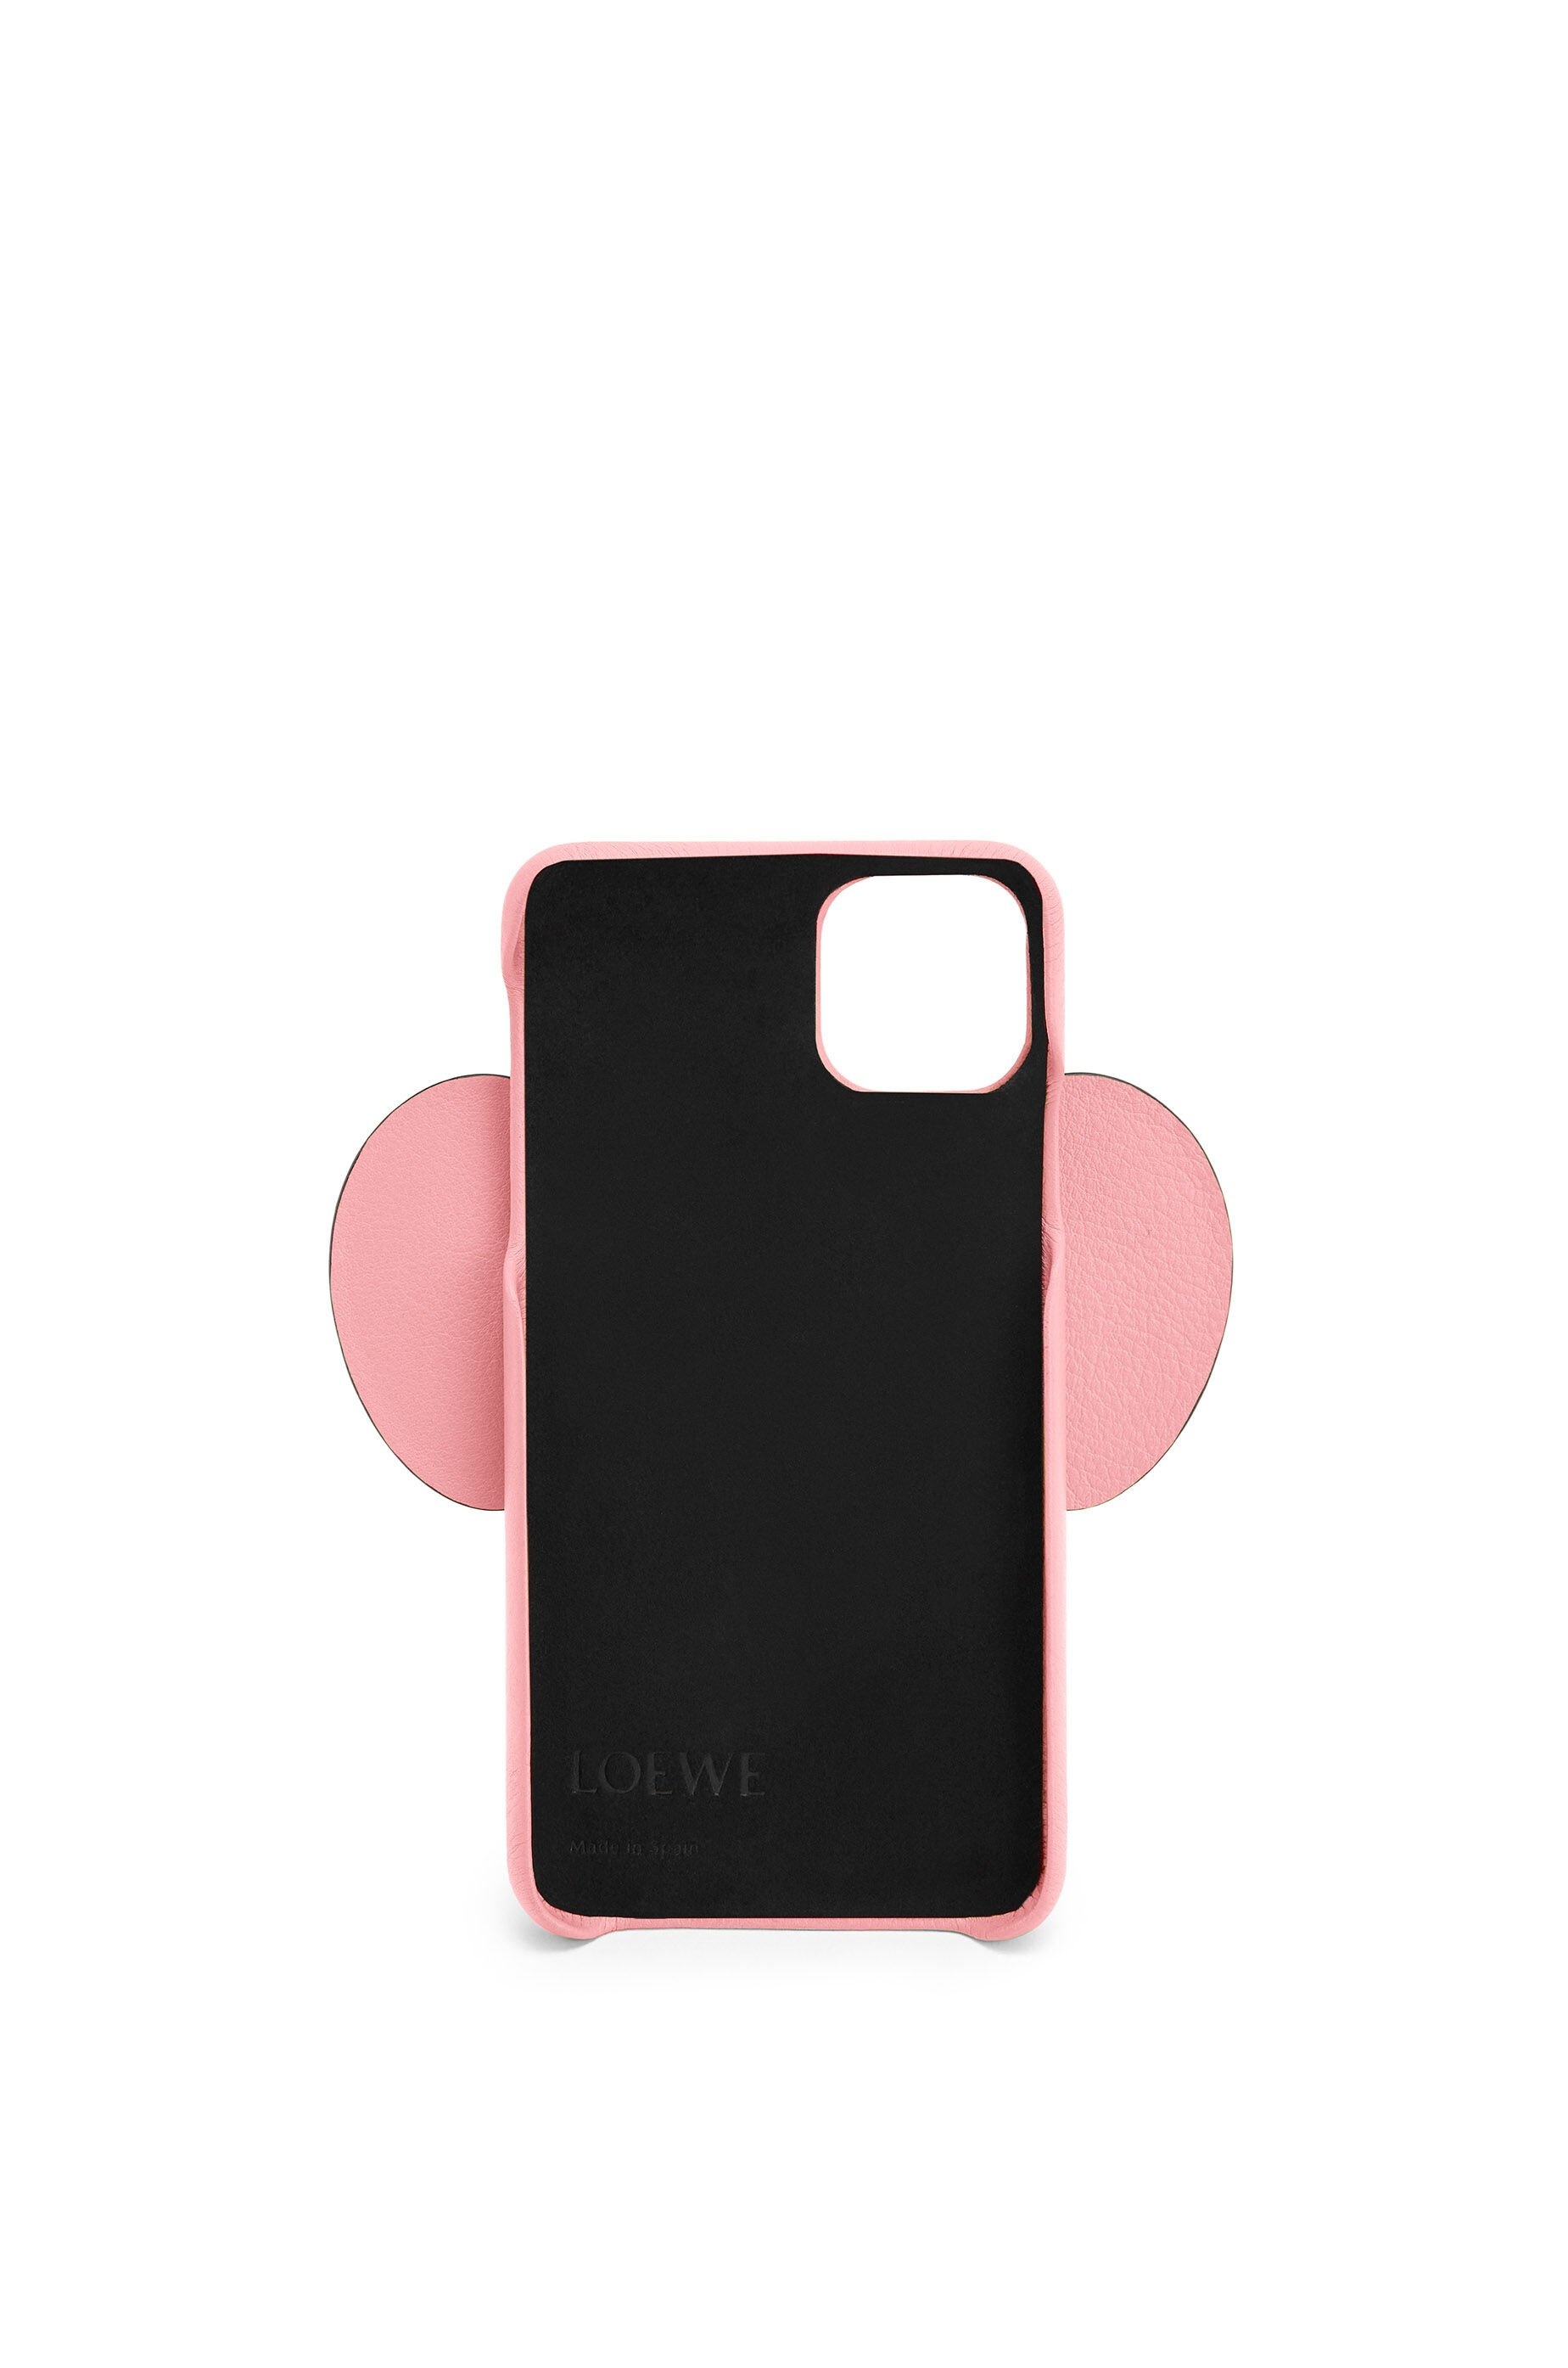 Elephant cover for iPhone 11 Pro Max in classic calfskin - 3